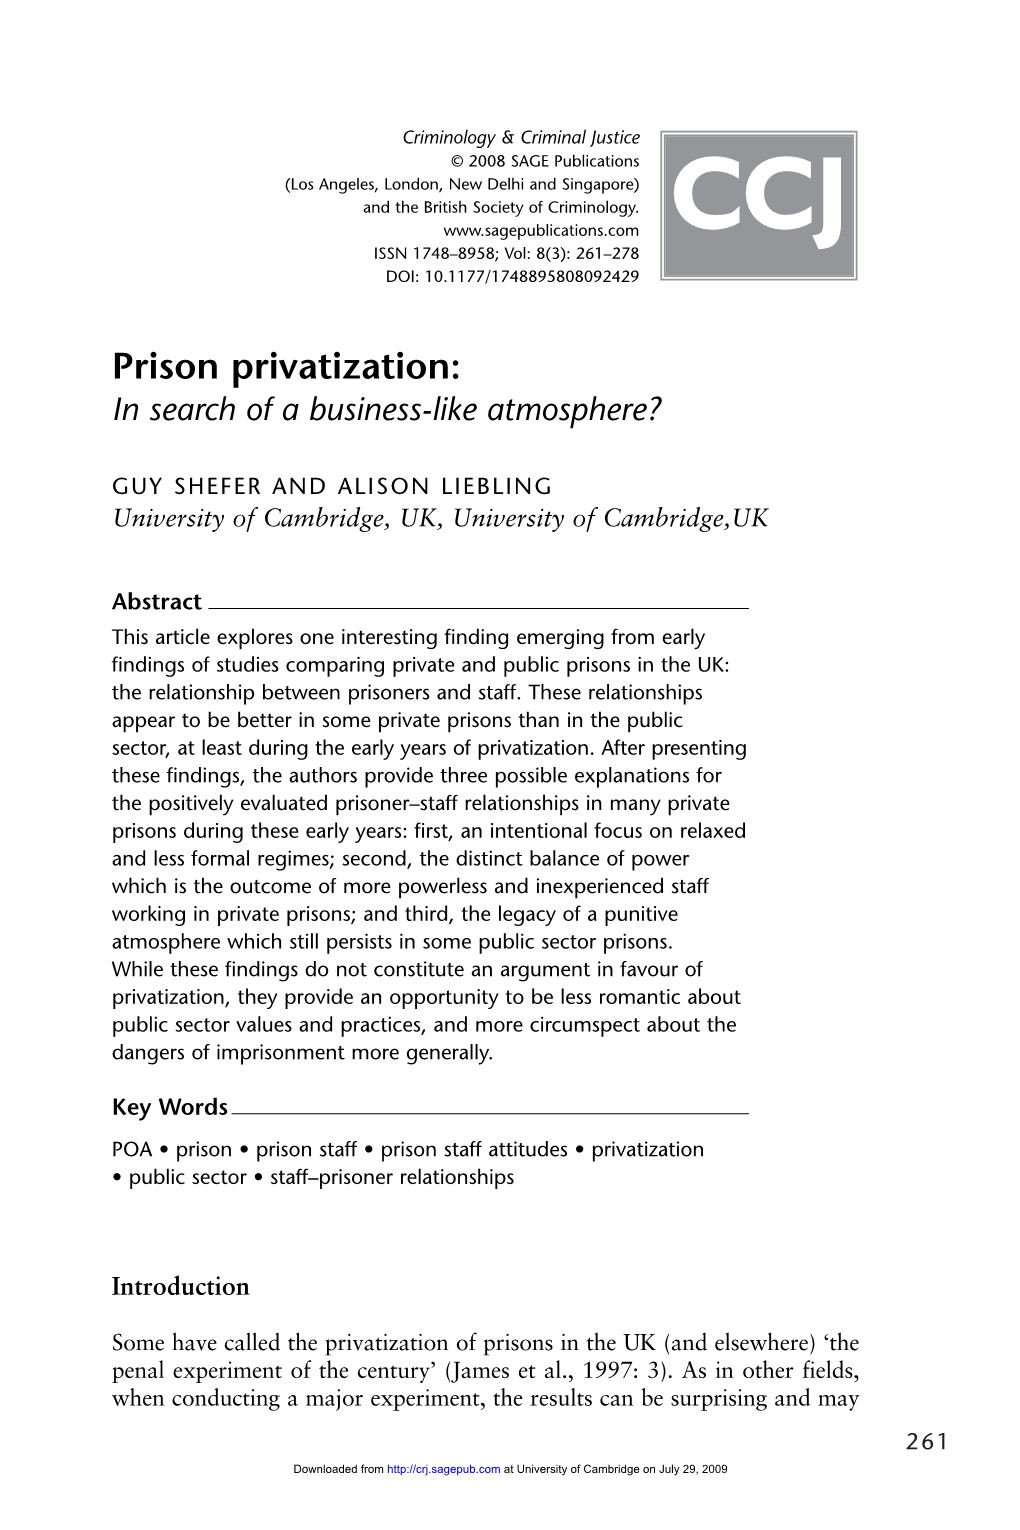 Prison Privatization: in Search of a Business-Like Atmosphere?